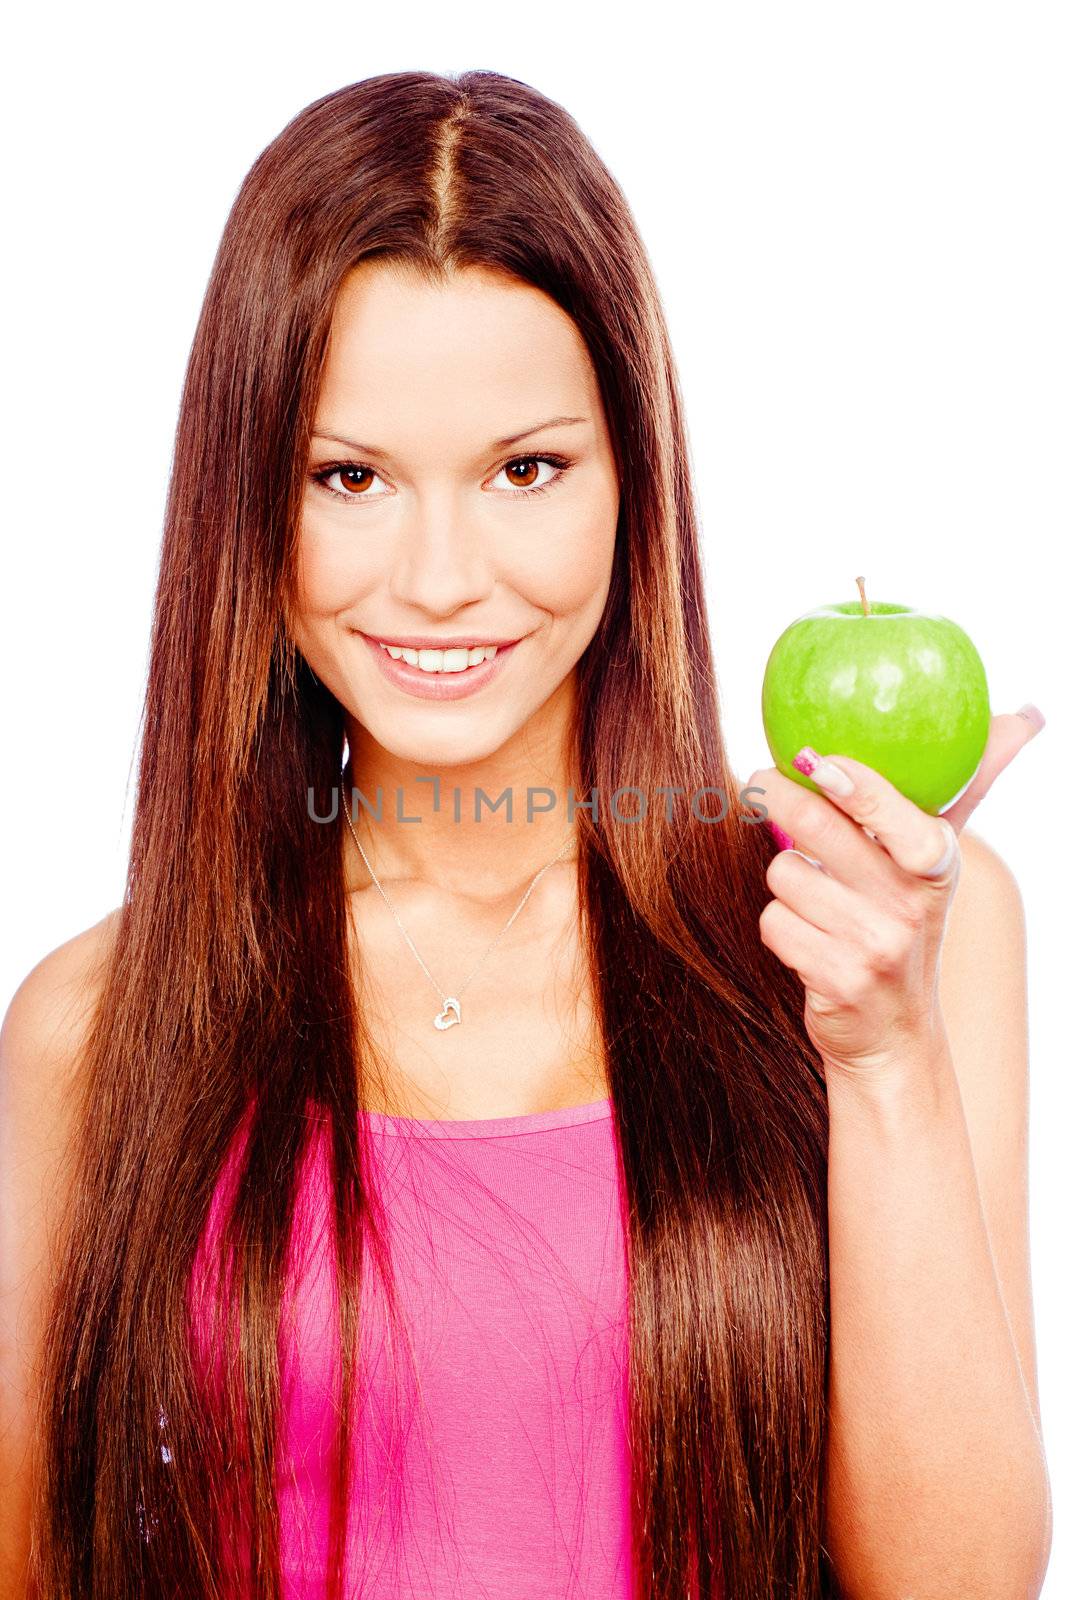 Happy woman with green apple, isolated on white